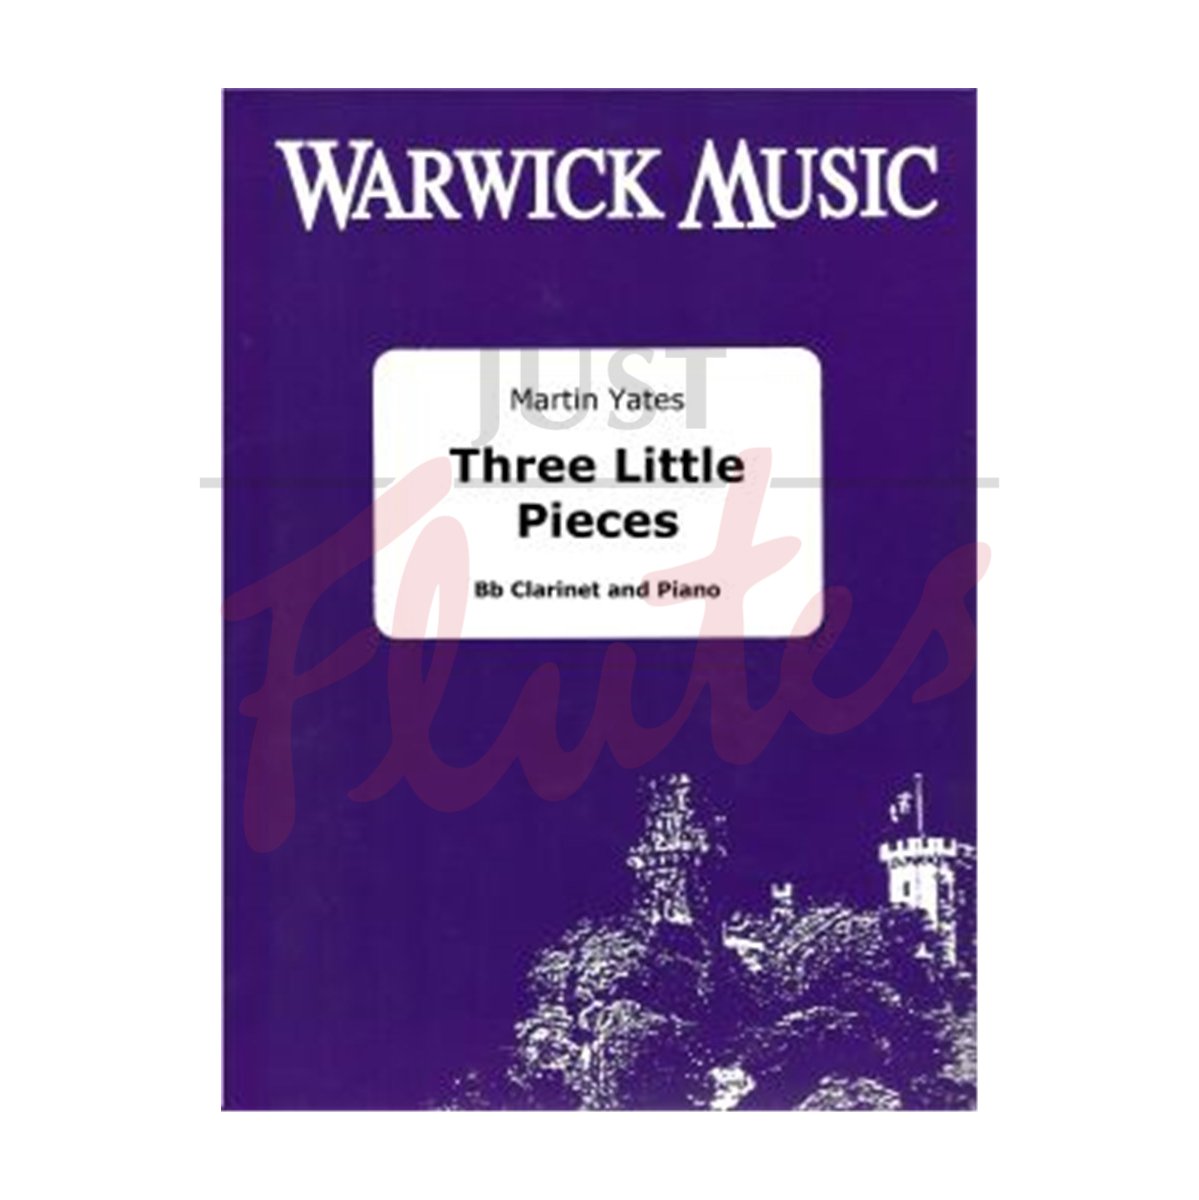 Three Little Pieces for Clarinet and Piano